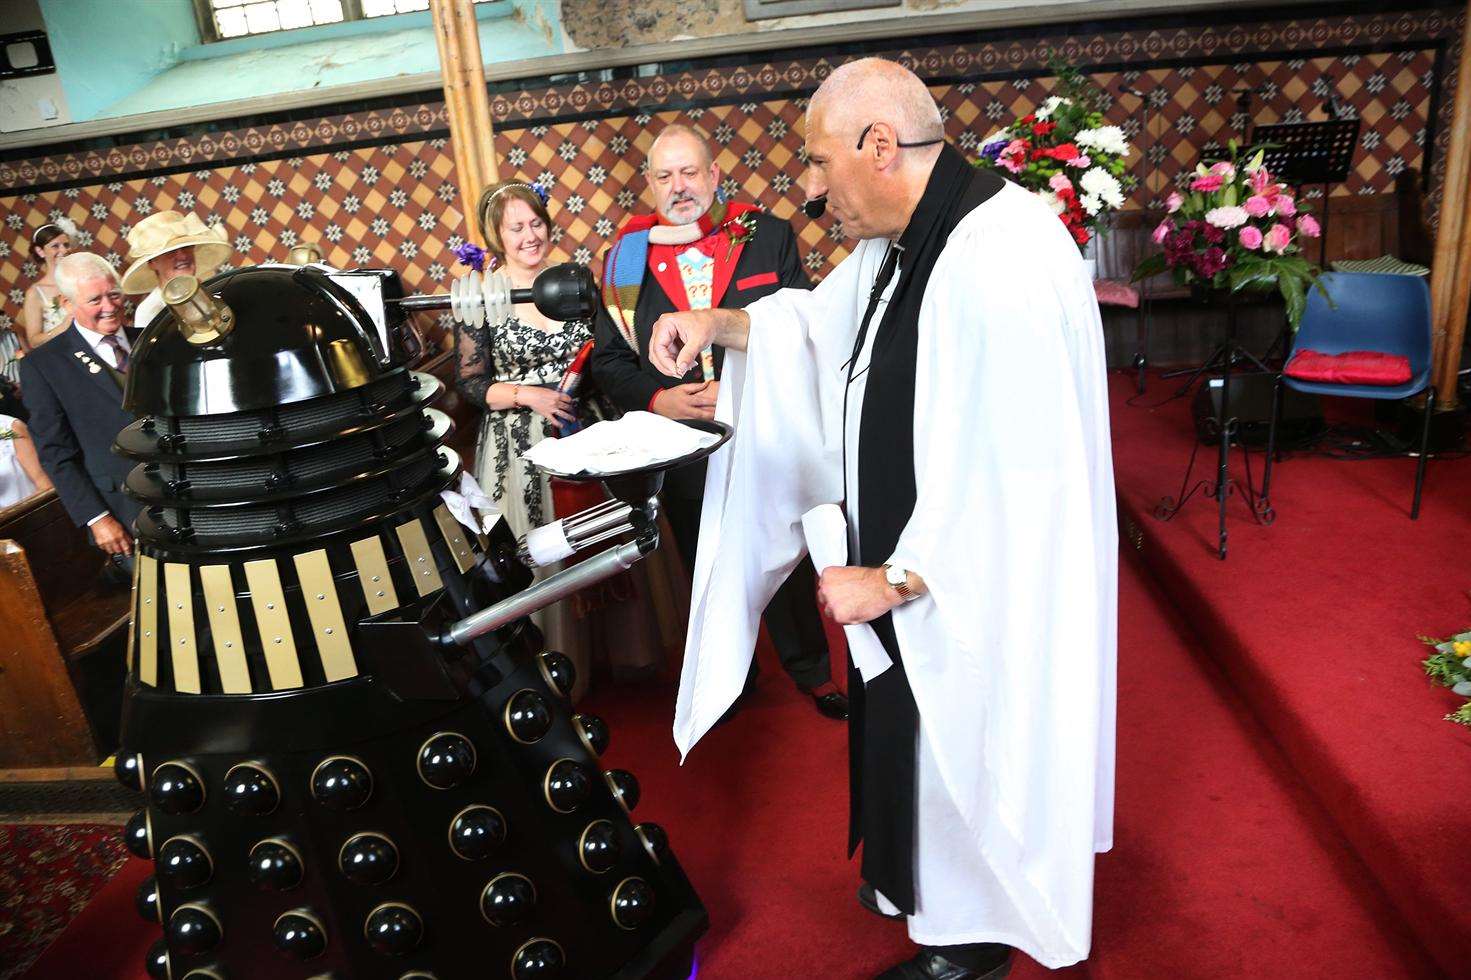 Fortunately the Dalek only interrupted the ceremony to provide the ring, handing it here to rector of St Peter & St Paul's Graham Herbert.